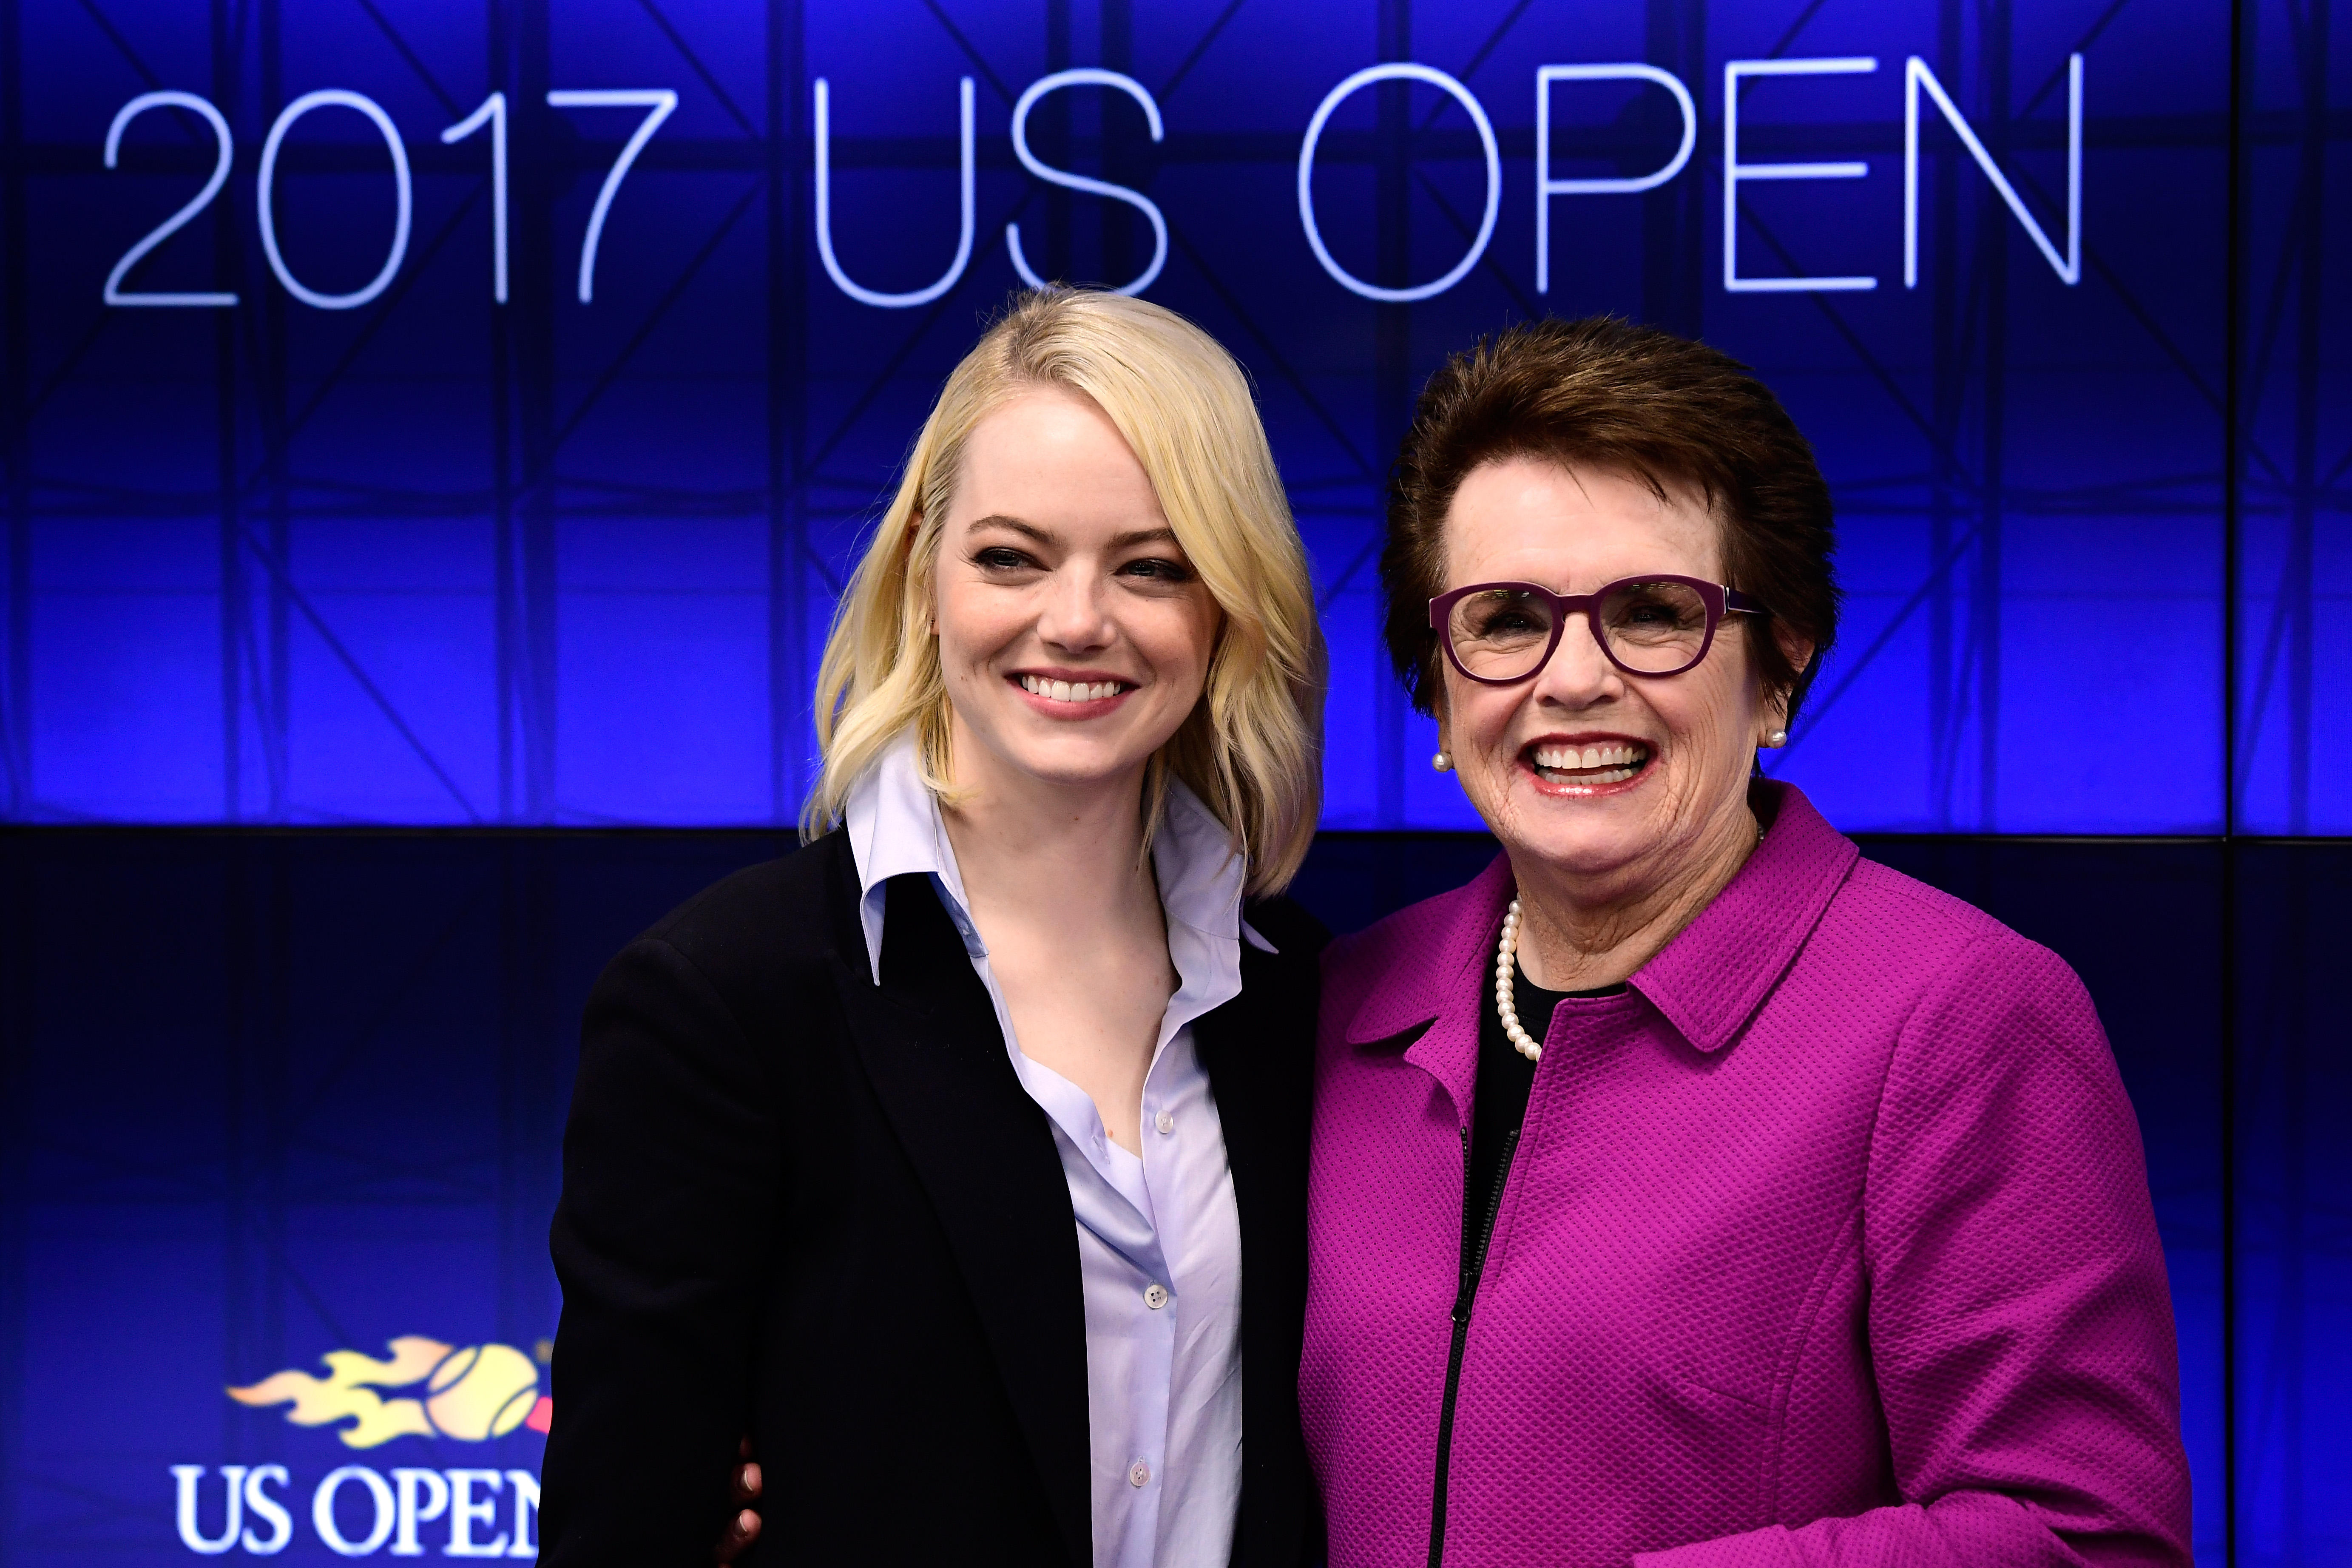 Battle of the Sexes: Emma Stone and Billie Jean King attend US Open together